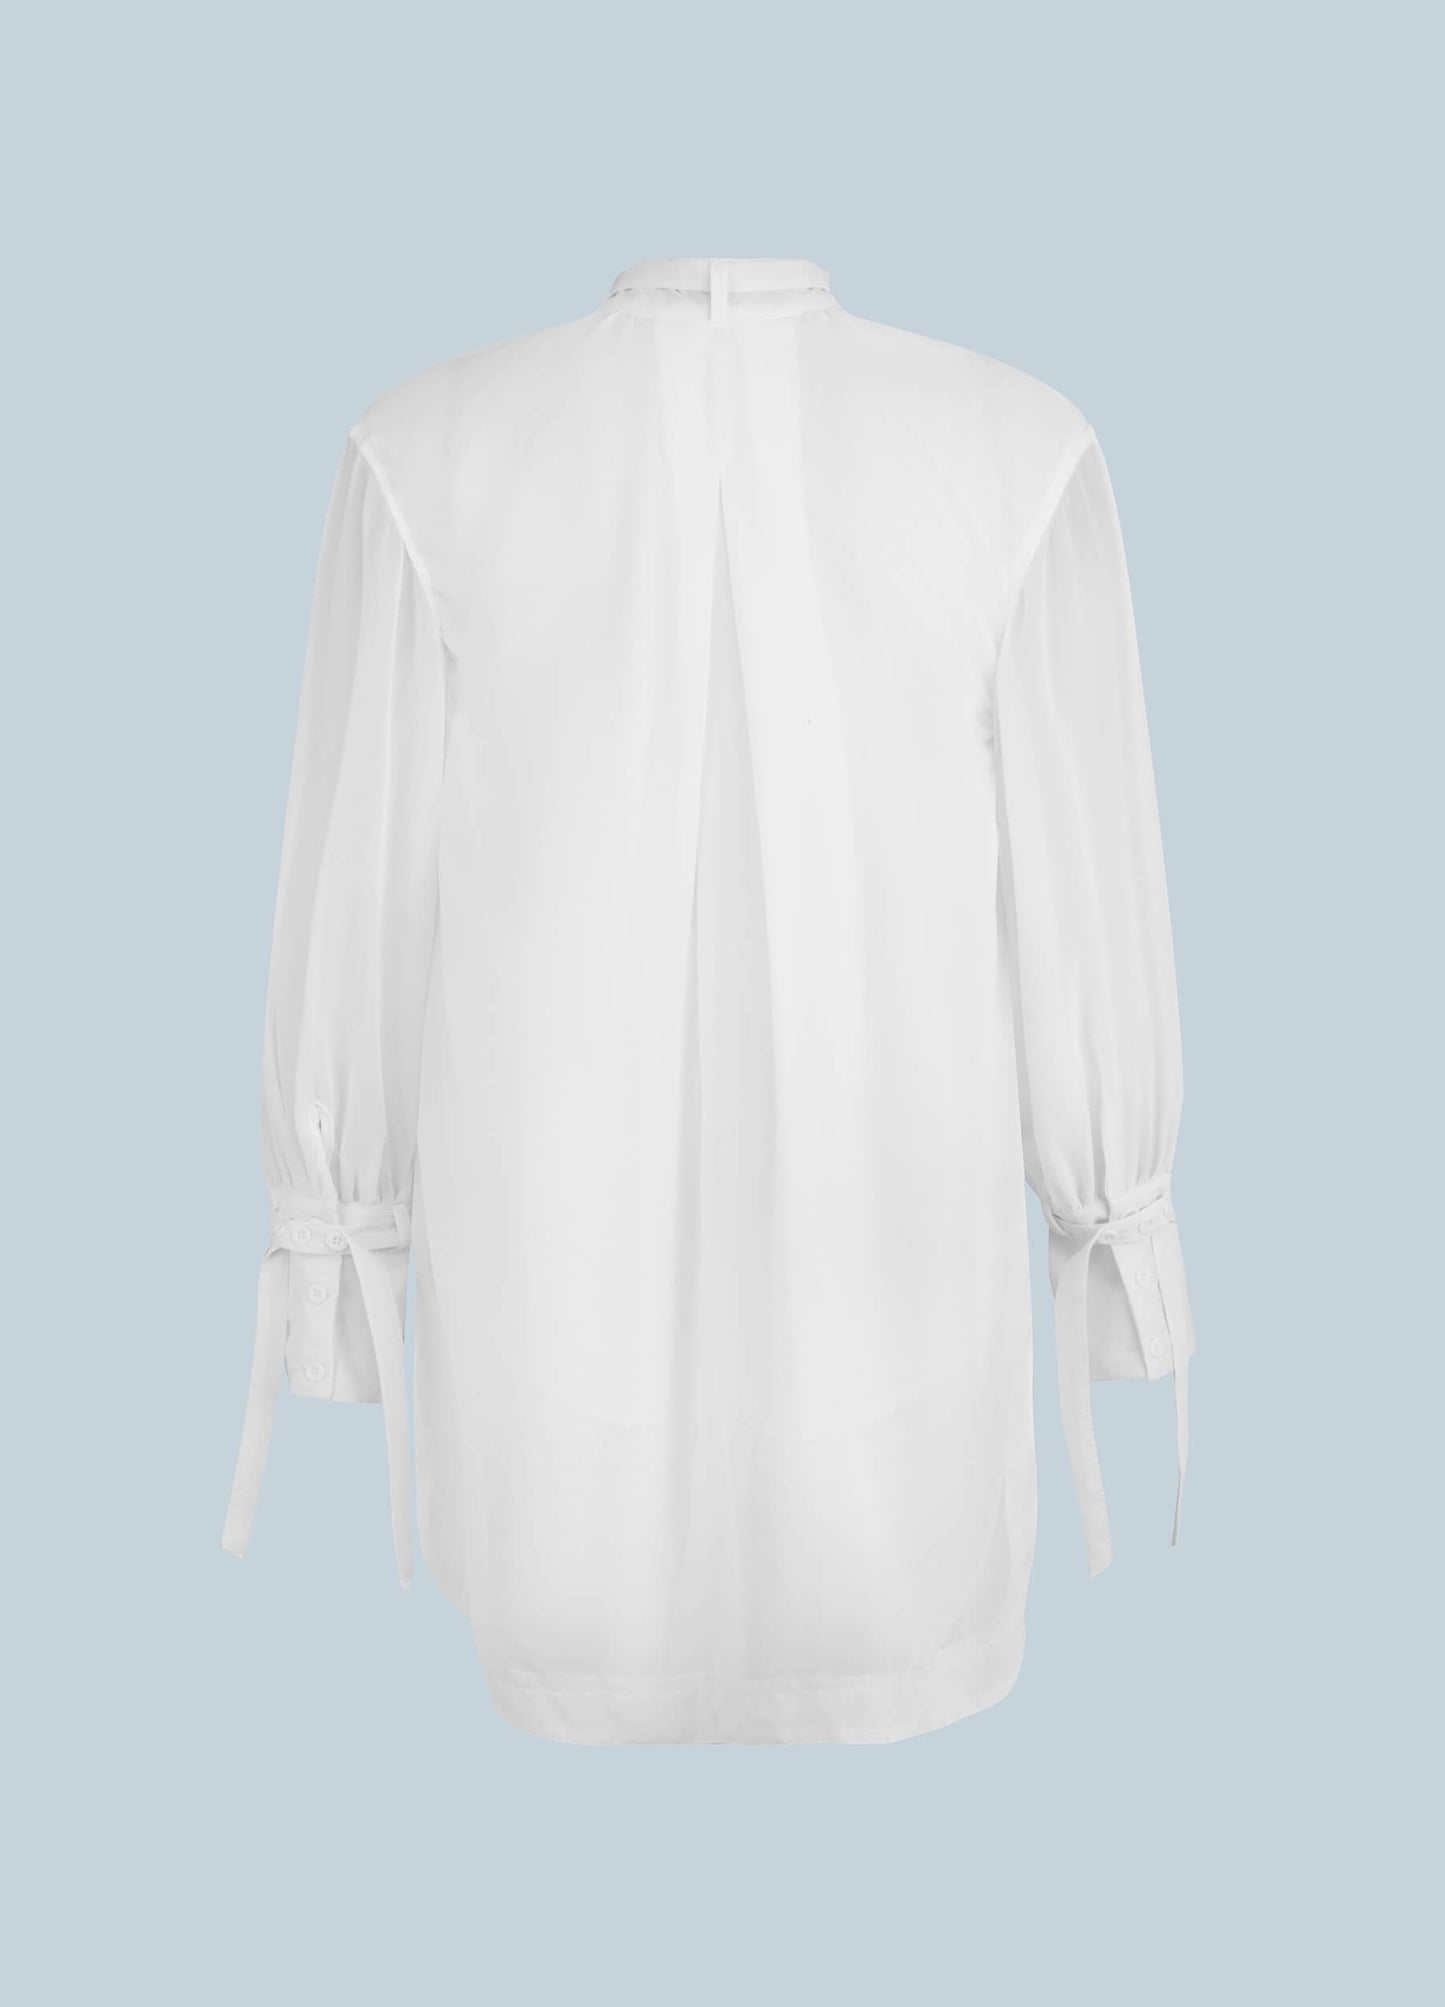 Women's Solid Tie-Neck High Low Hem Tunic-White back view